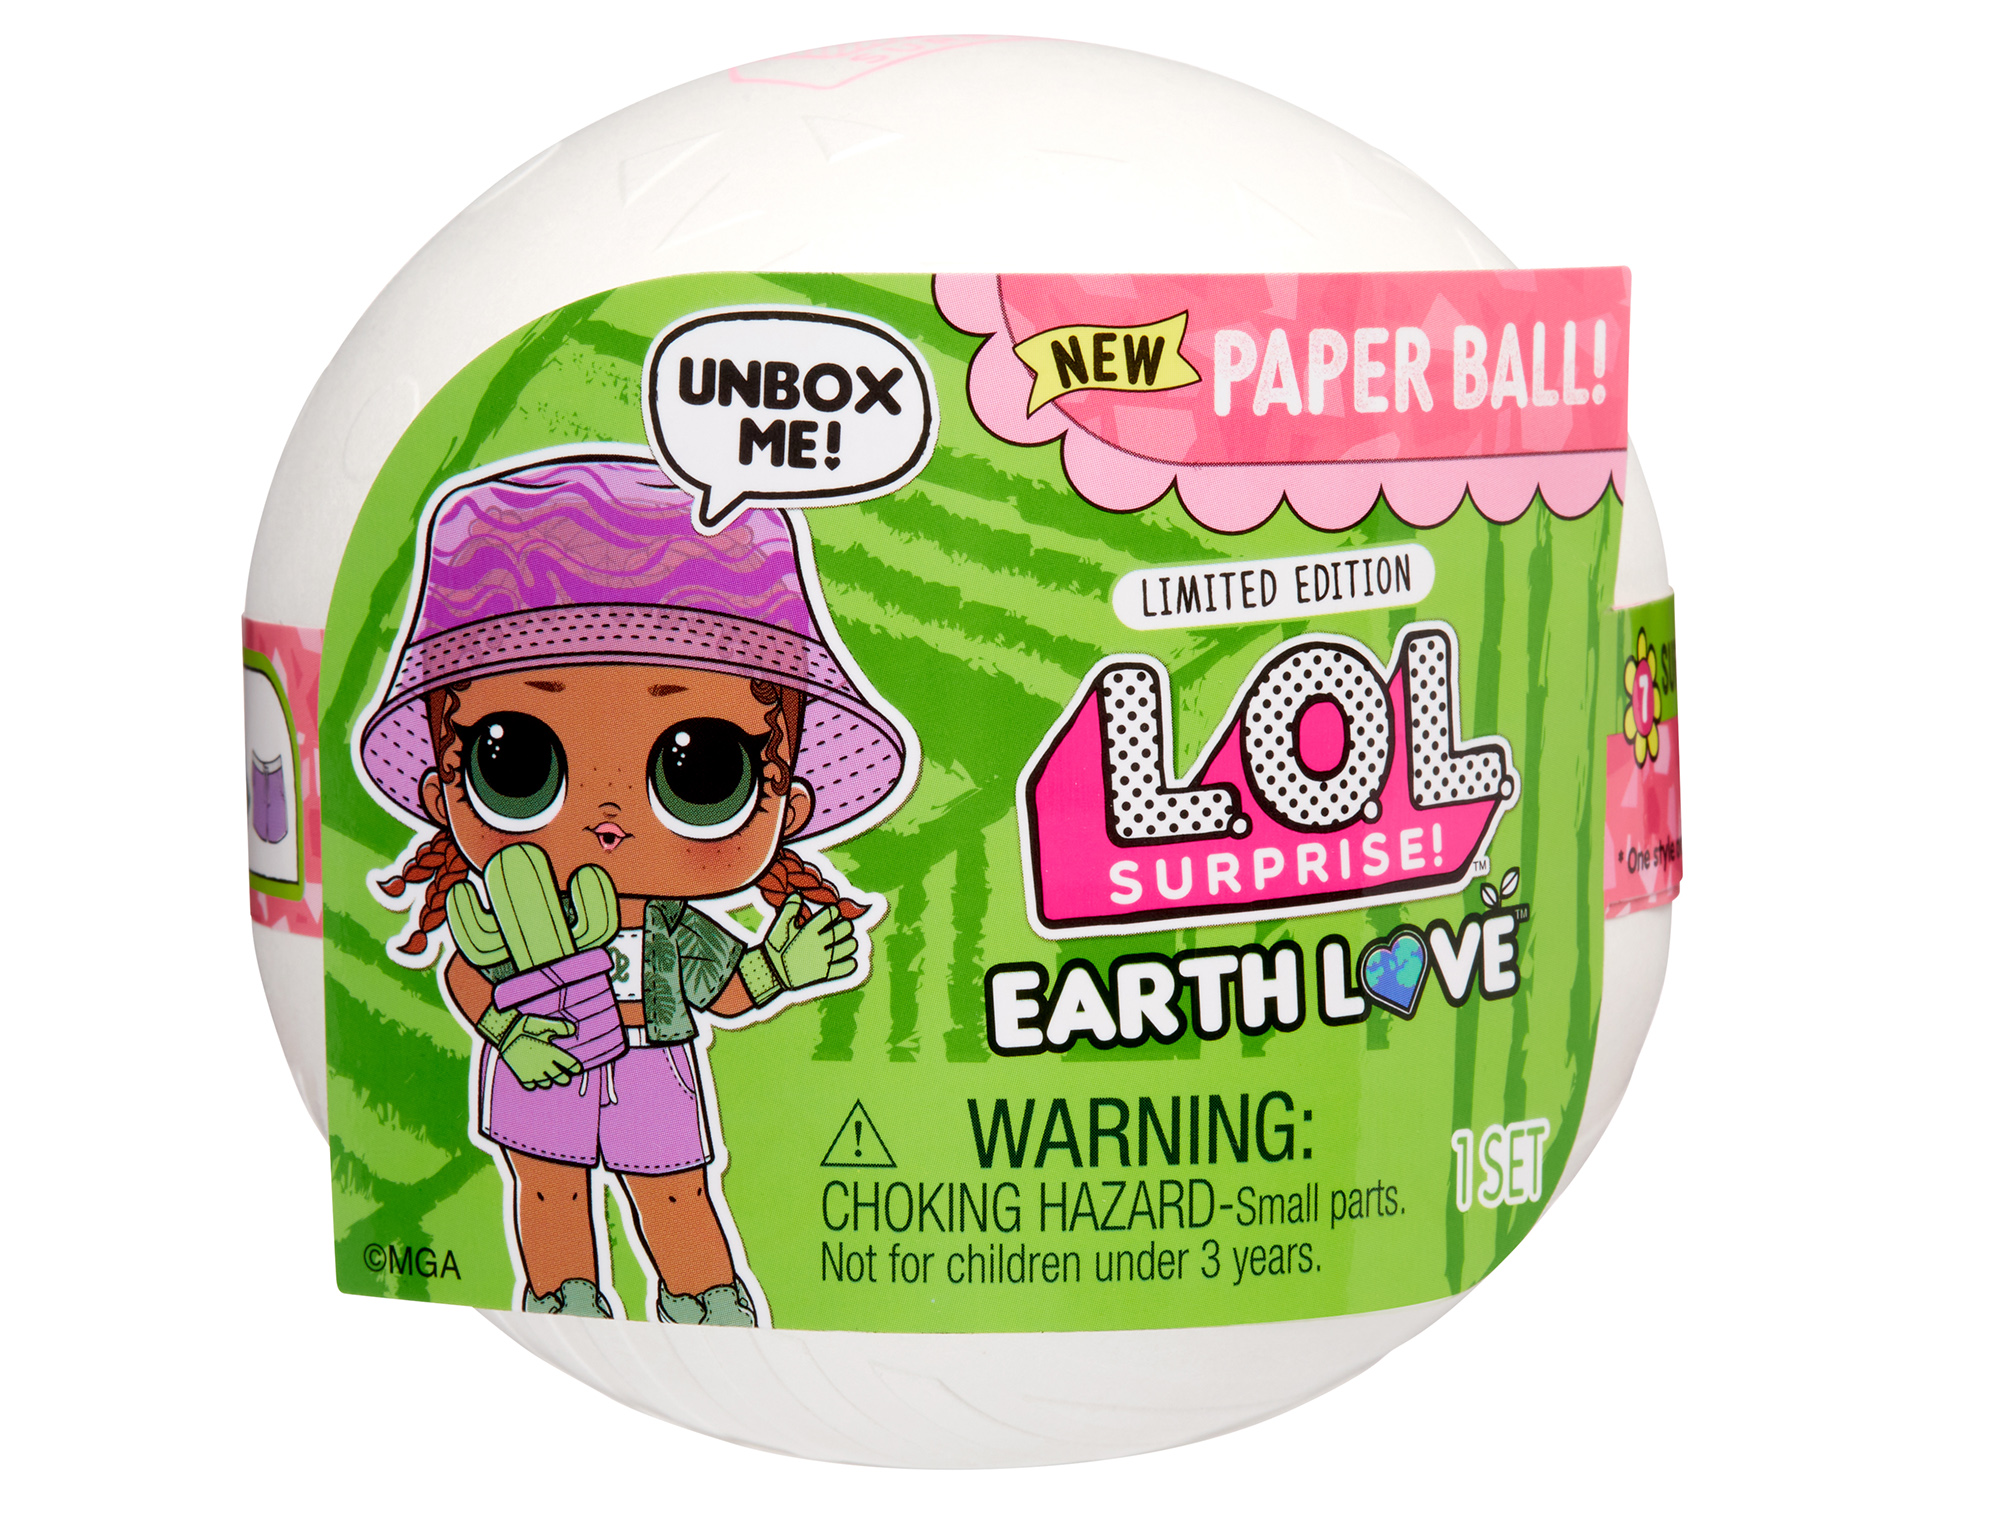 LOL Surprise Earth Love limited edition dolls in new paper ball